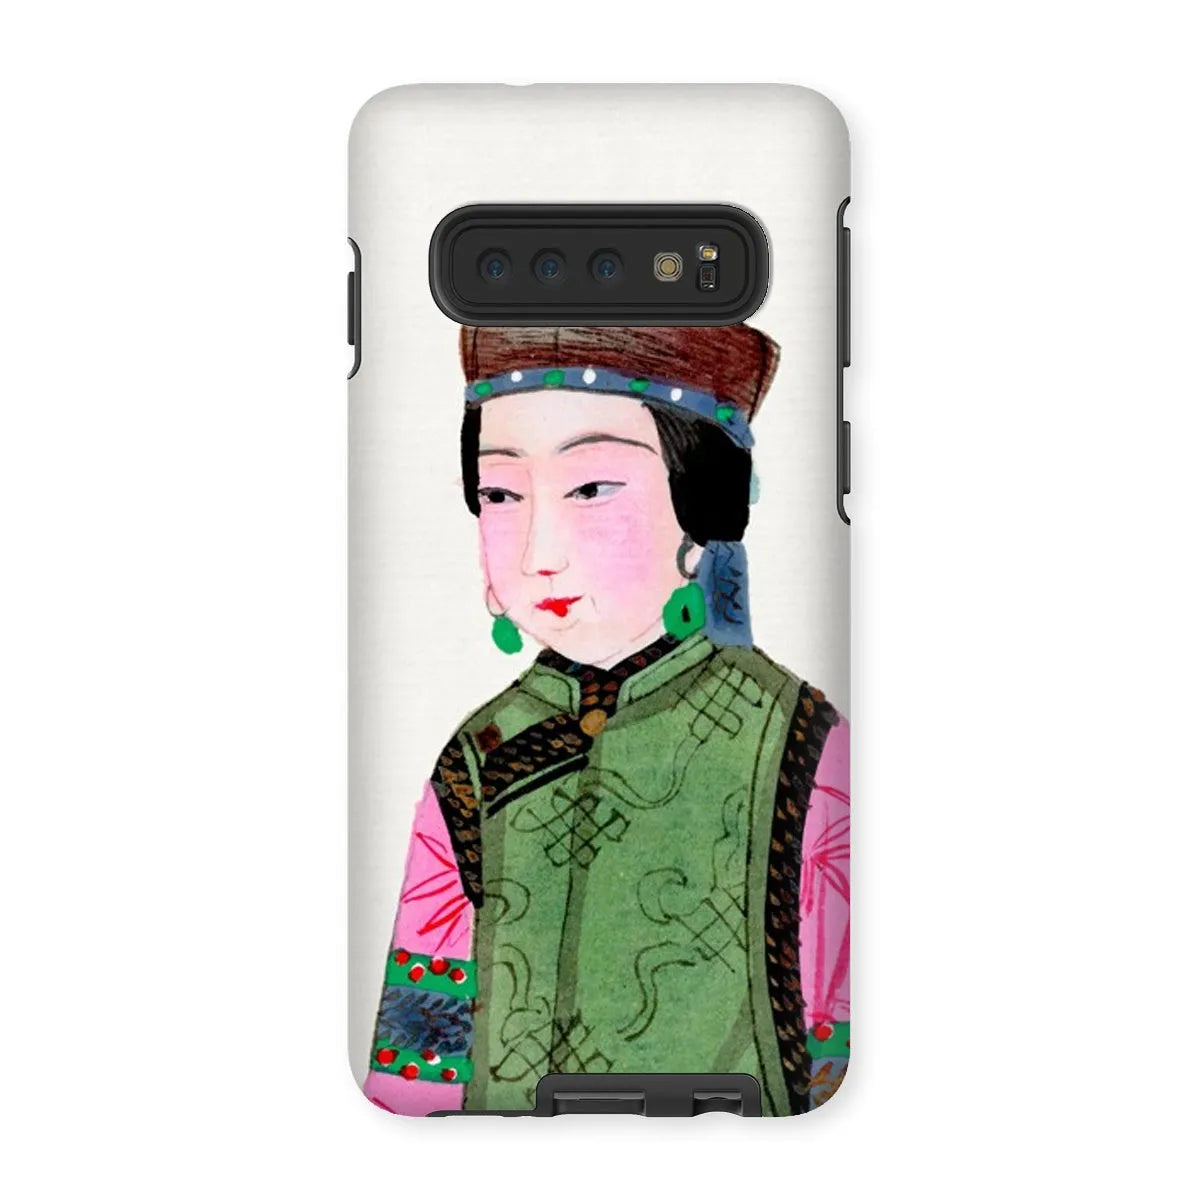 Noblewoman In Winter - Chinese Aesthetic Art Phone Case - Samsung Galaxy S10 / Matte - Mobile Phone Cases - Aesthetic